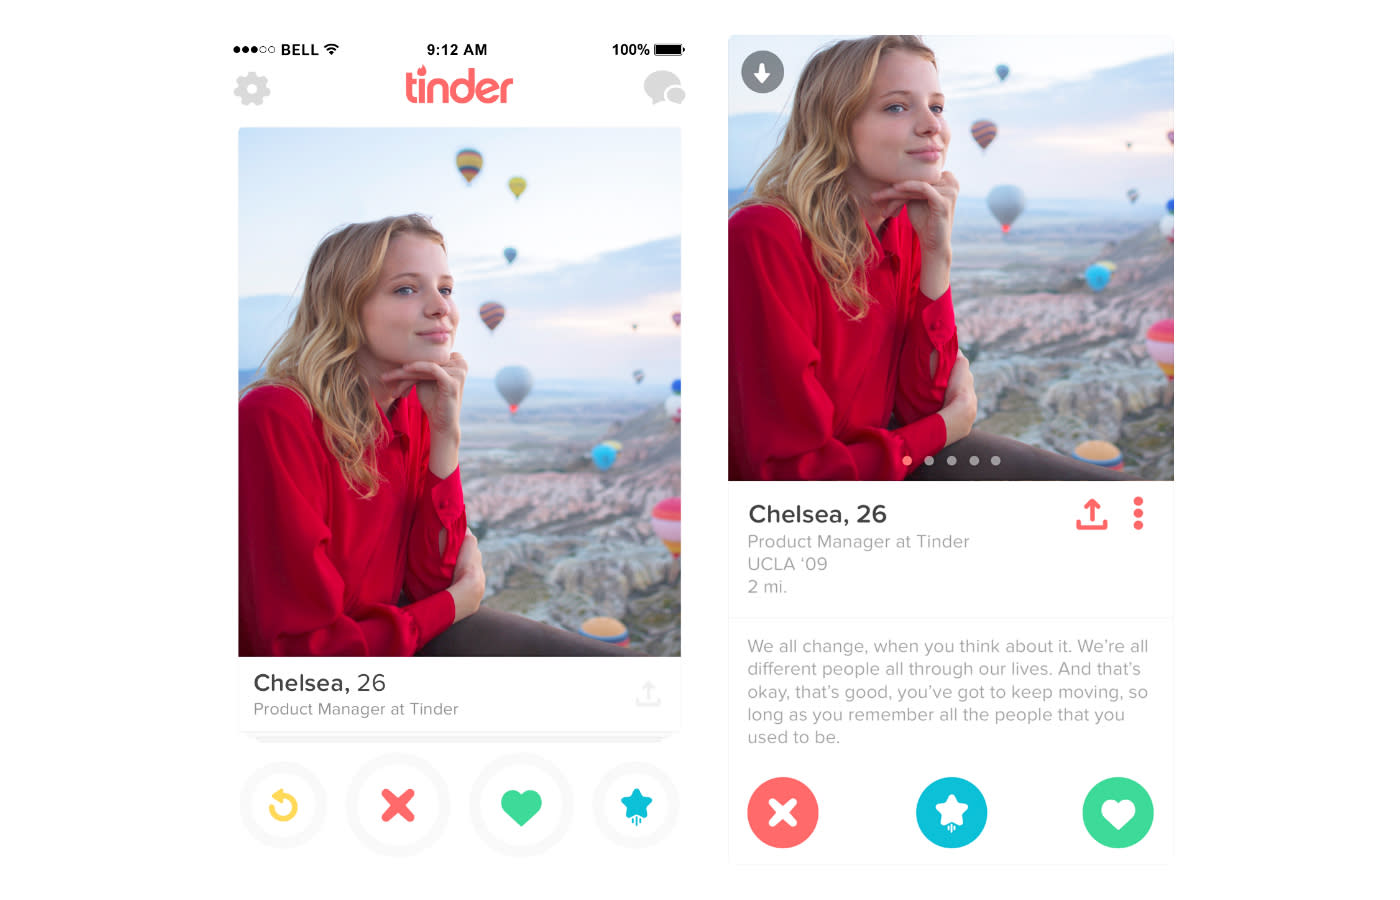 Play Cupid on Tinder by sharing profiles with your friends | Engadget